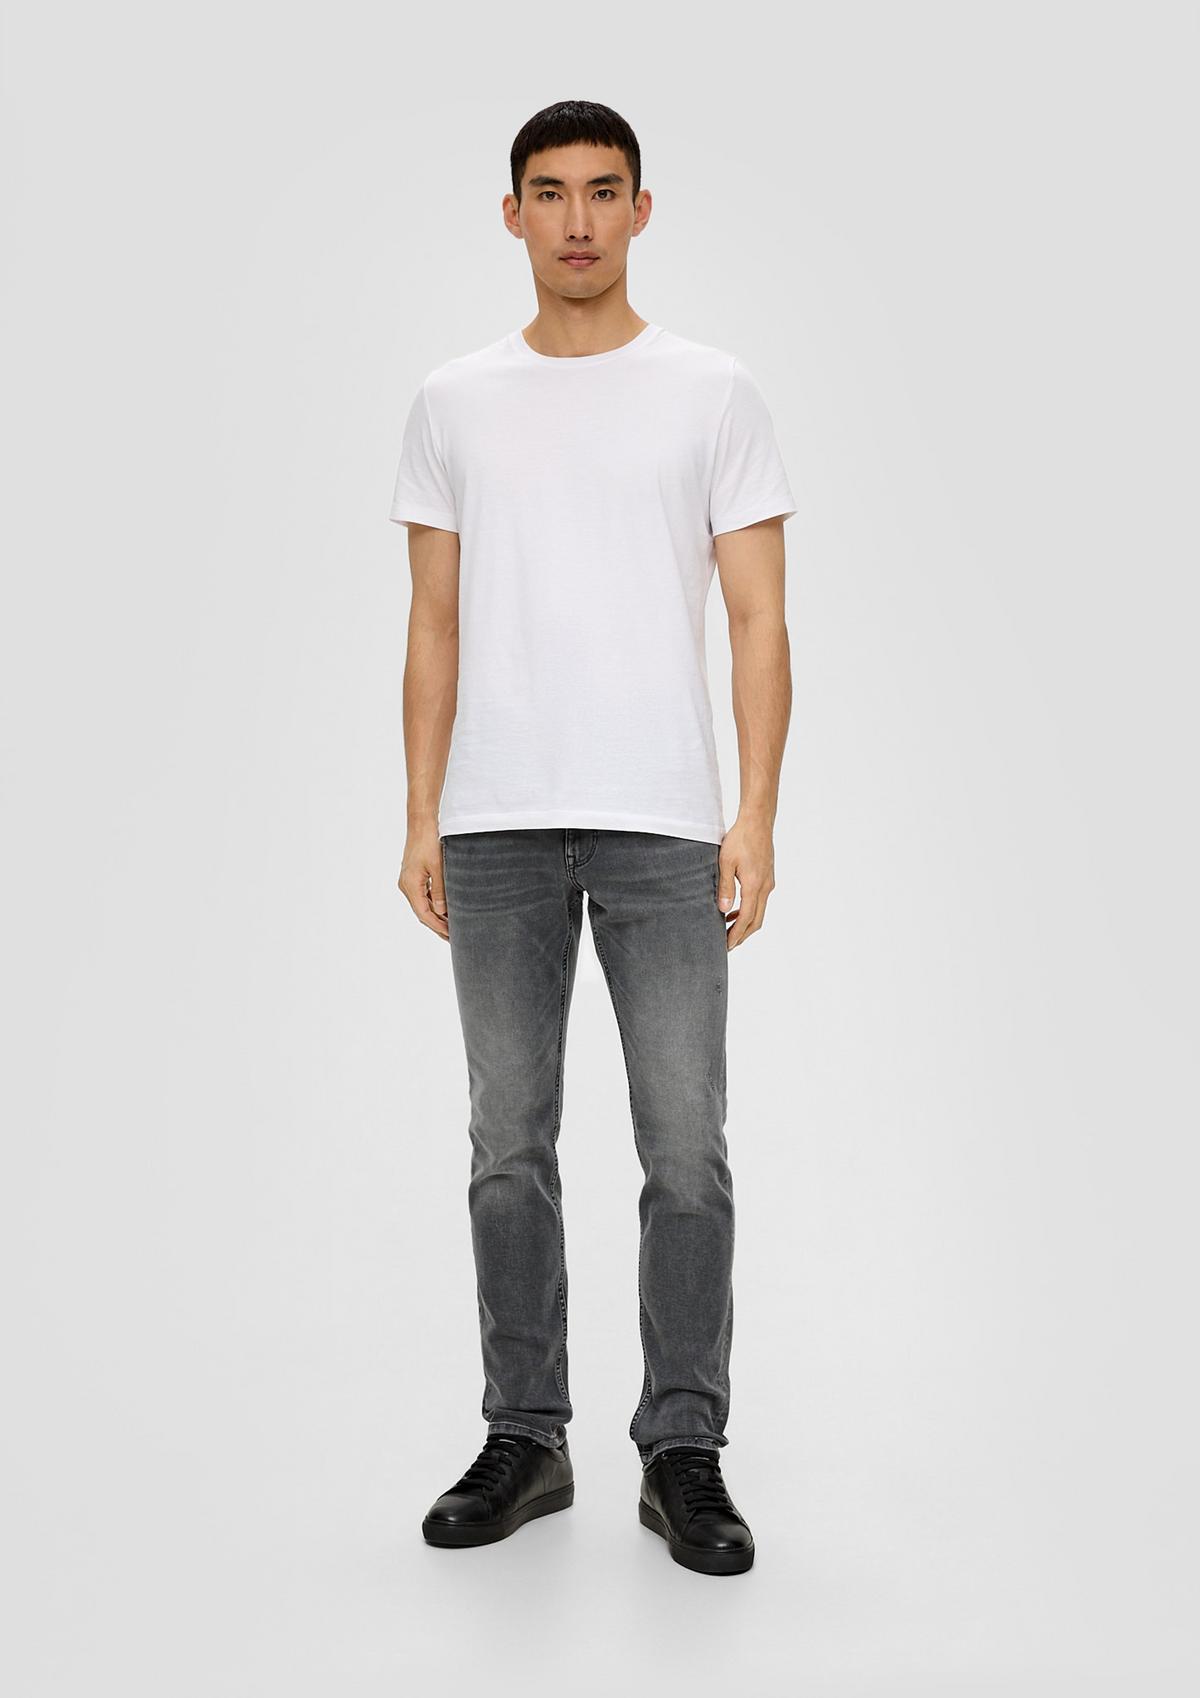 Jeans Keith / slim fit / mid rise / straight leg